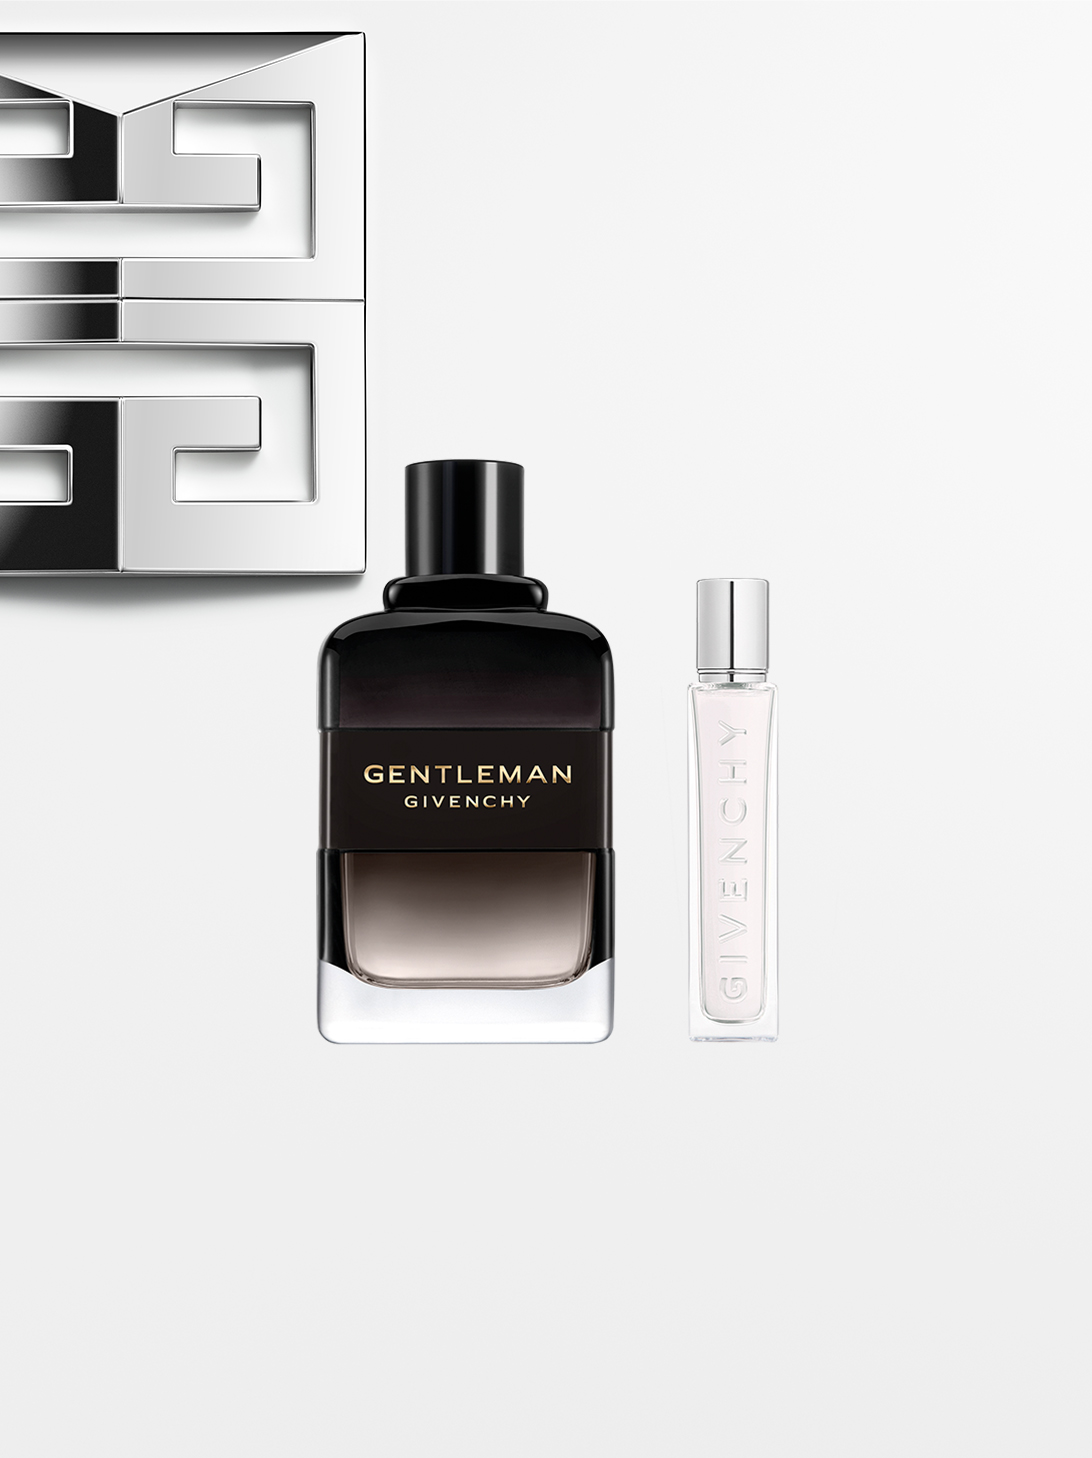 Givenchy Gentleman Society Father's day gift set